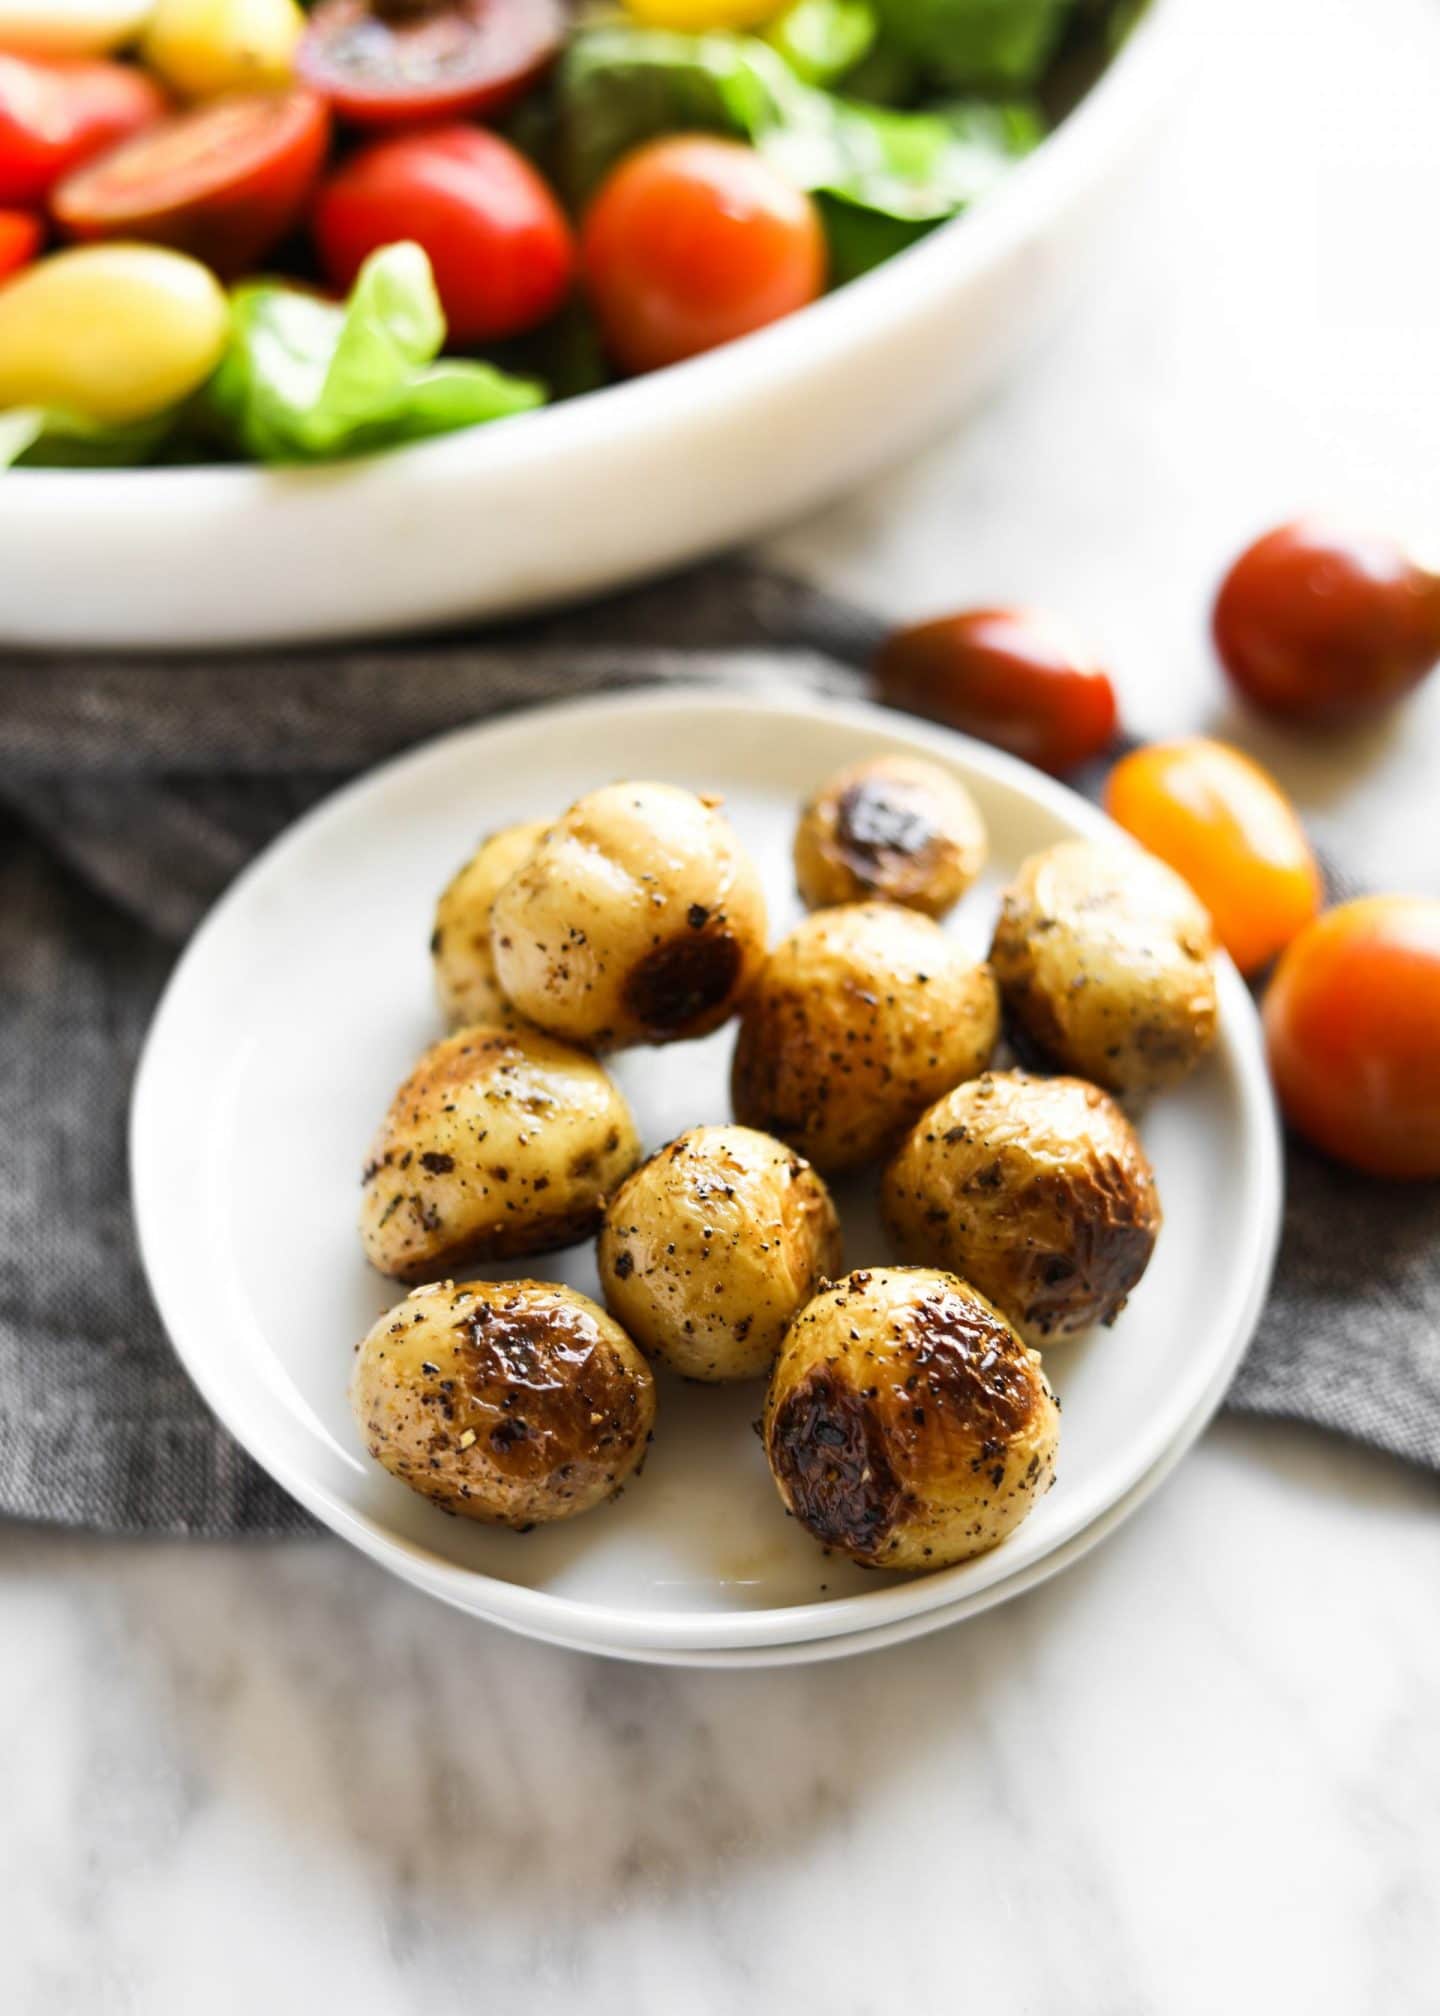 Pan-Roasted Potatoes with Herbs